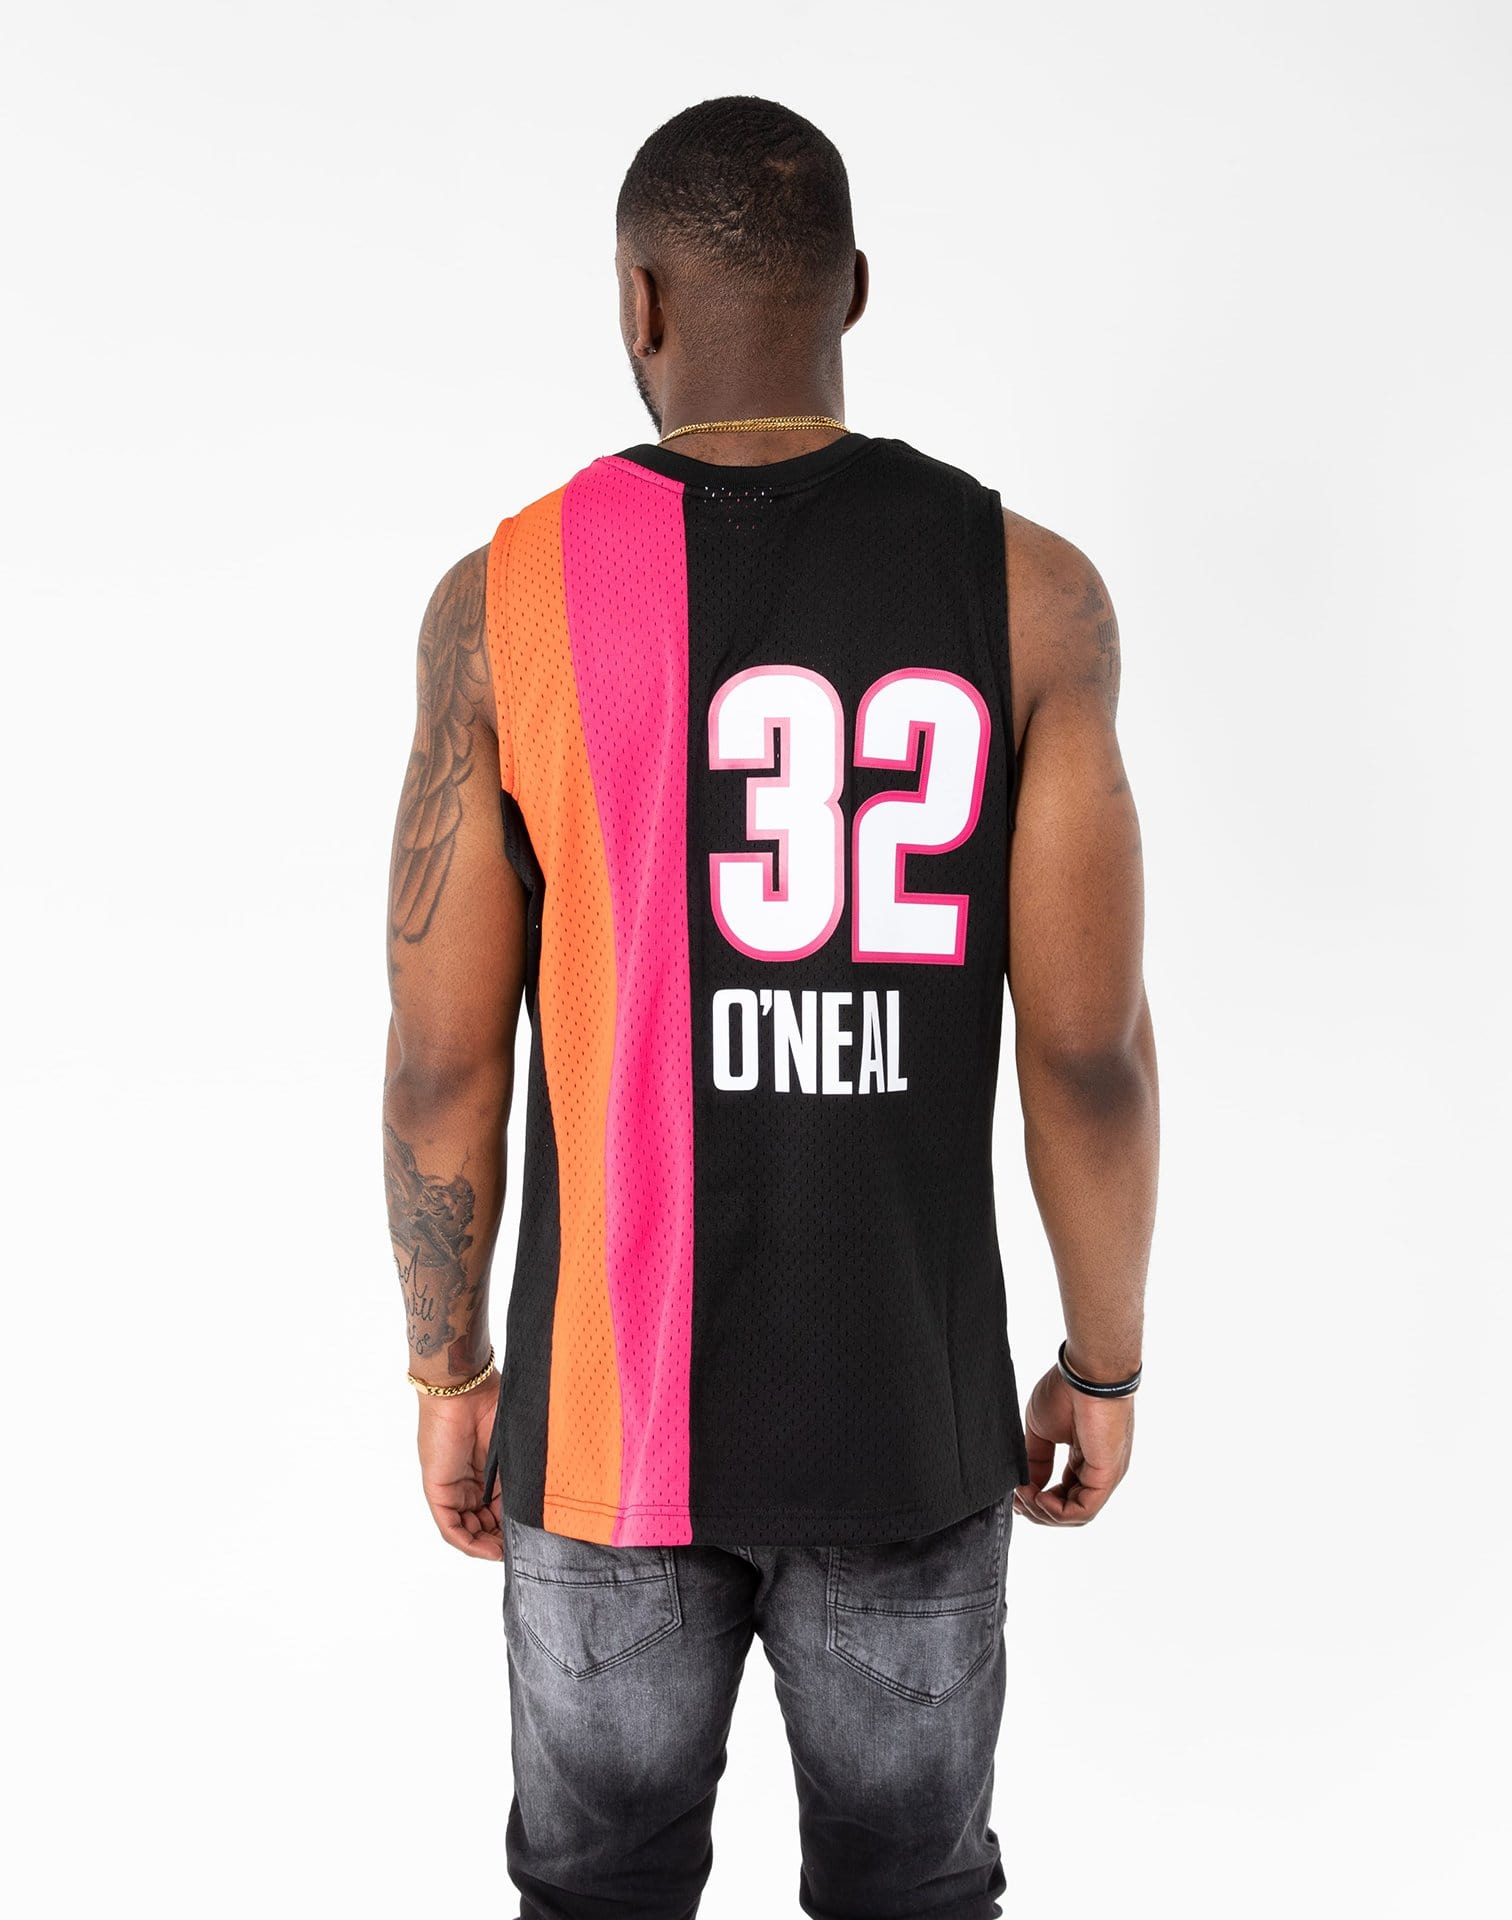 Men's Mitchell & Ness Shaquille O'Neal Pink/Black Miami Heat 2005